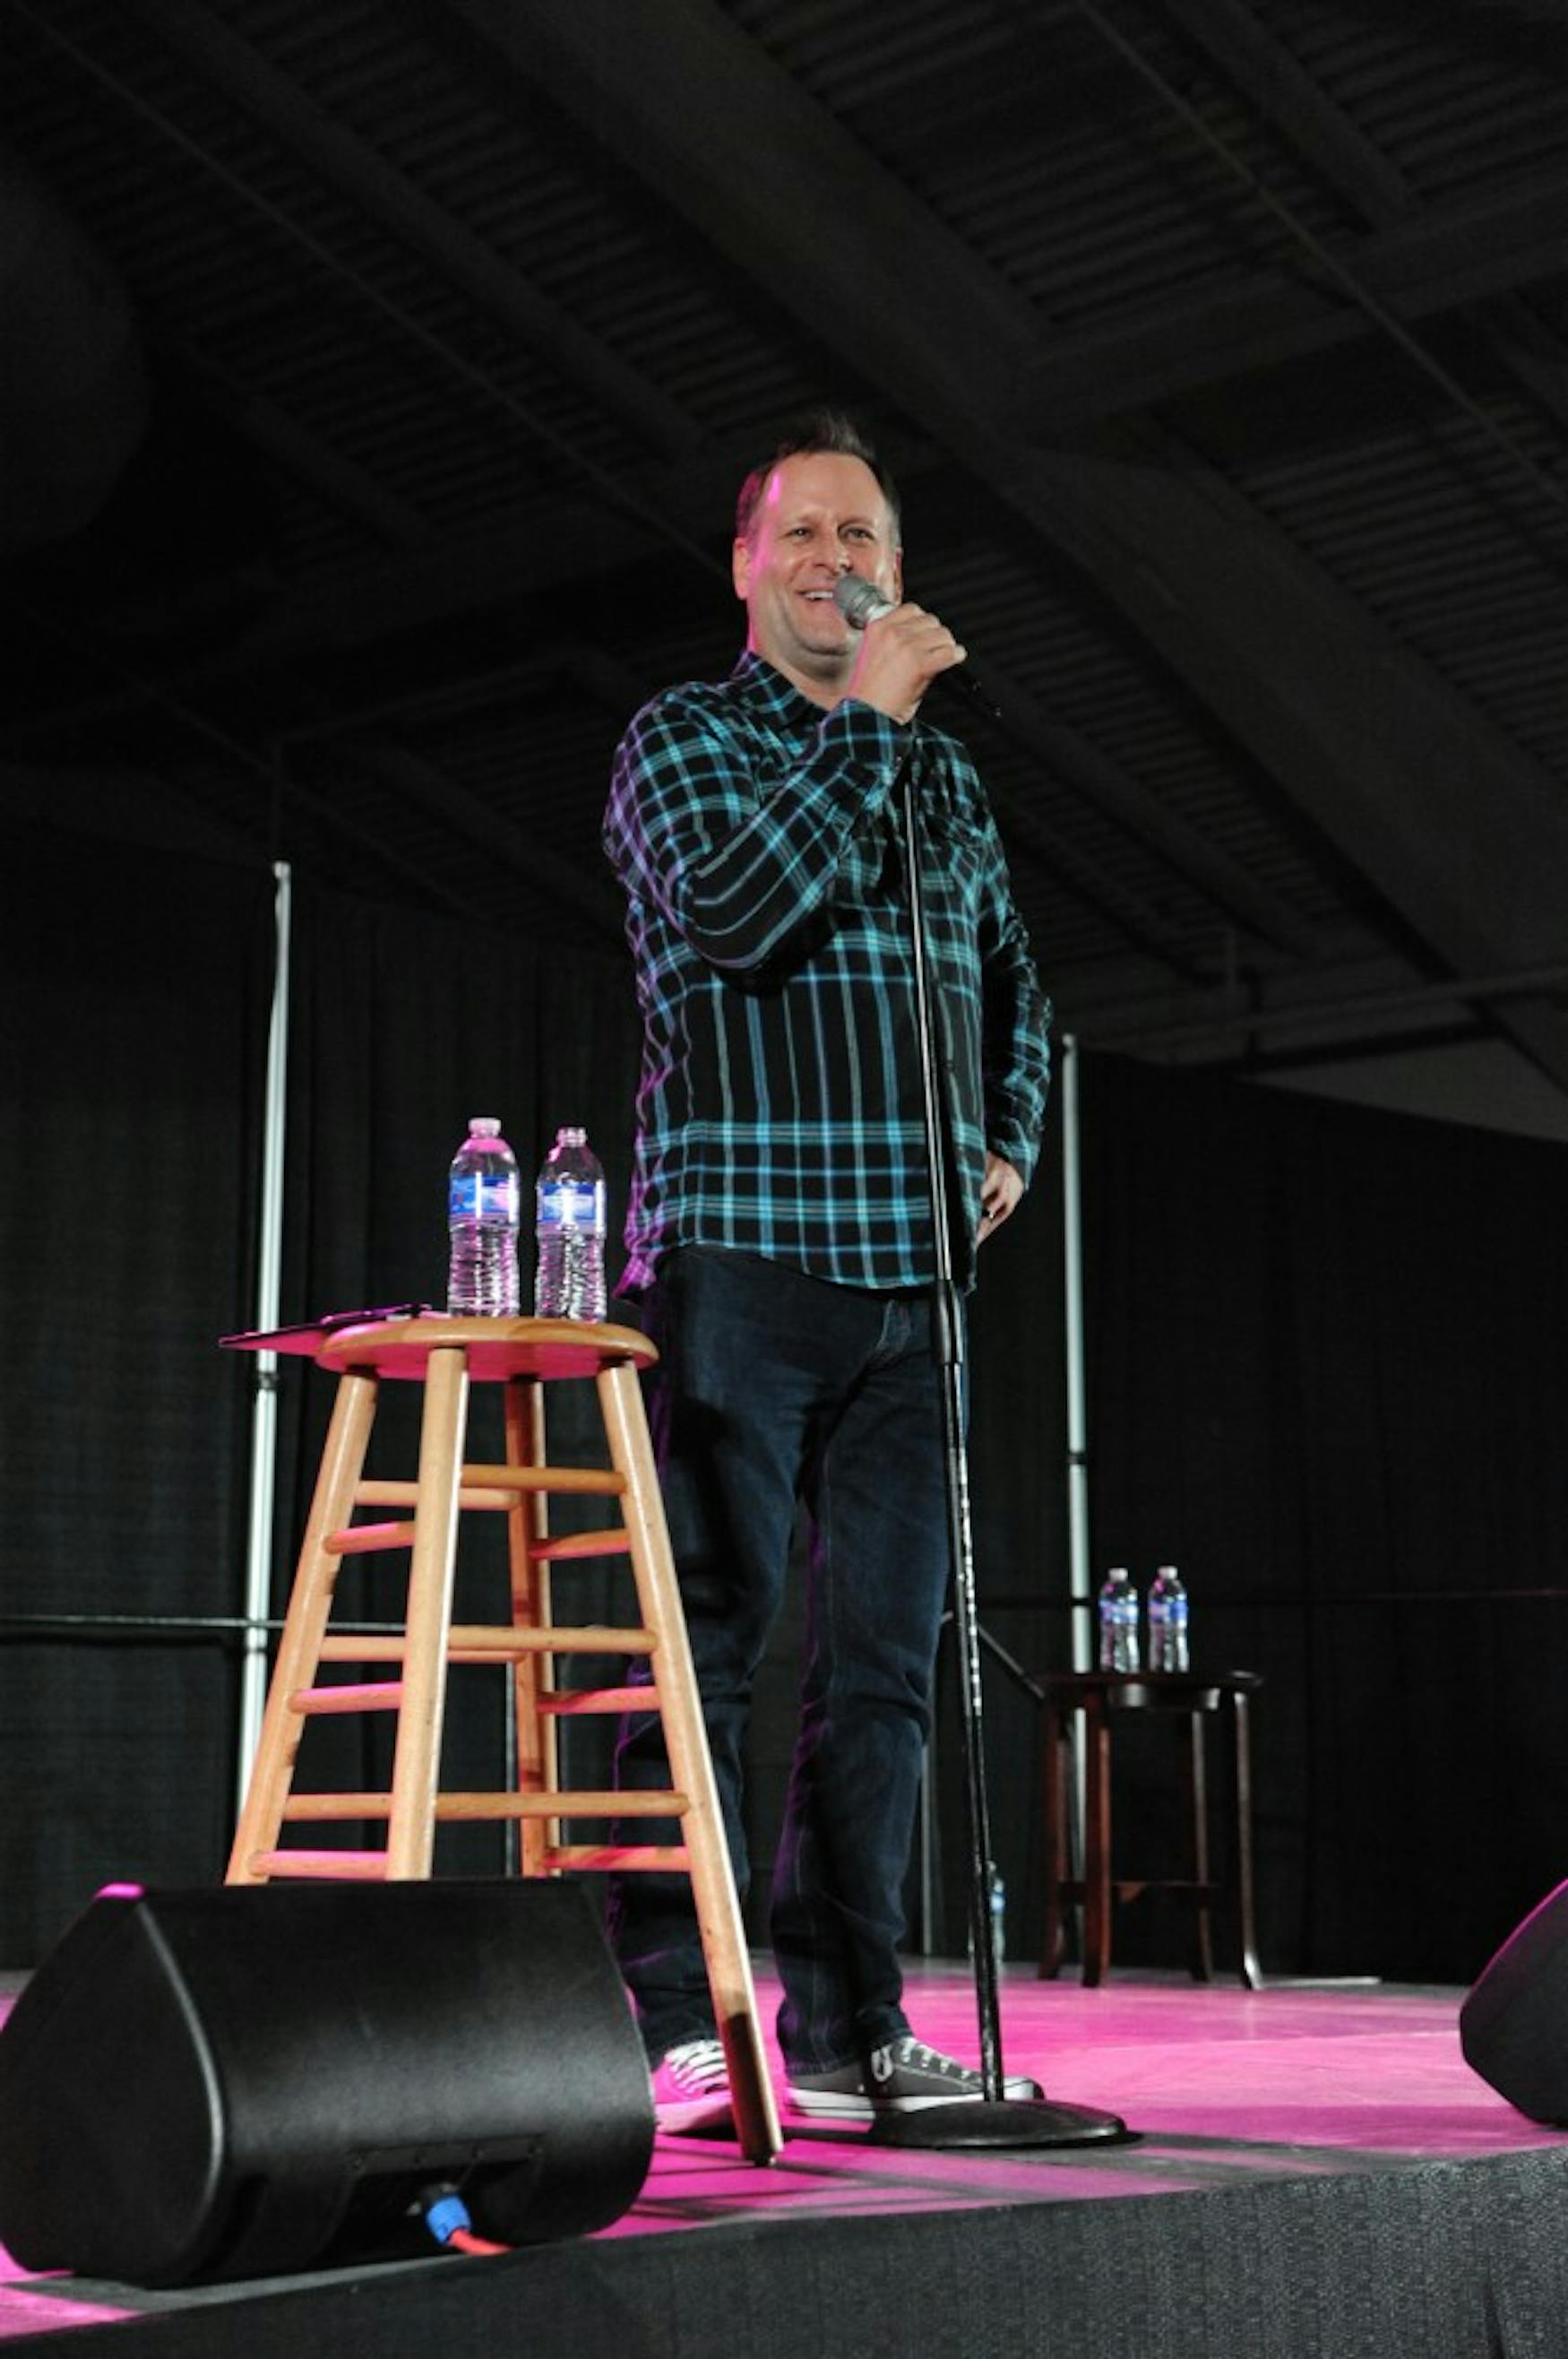 CUT IT OUT: Dave Coulier, known for his role on Full House as Uncle Joey, was the star of a comedy show on Friday night.